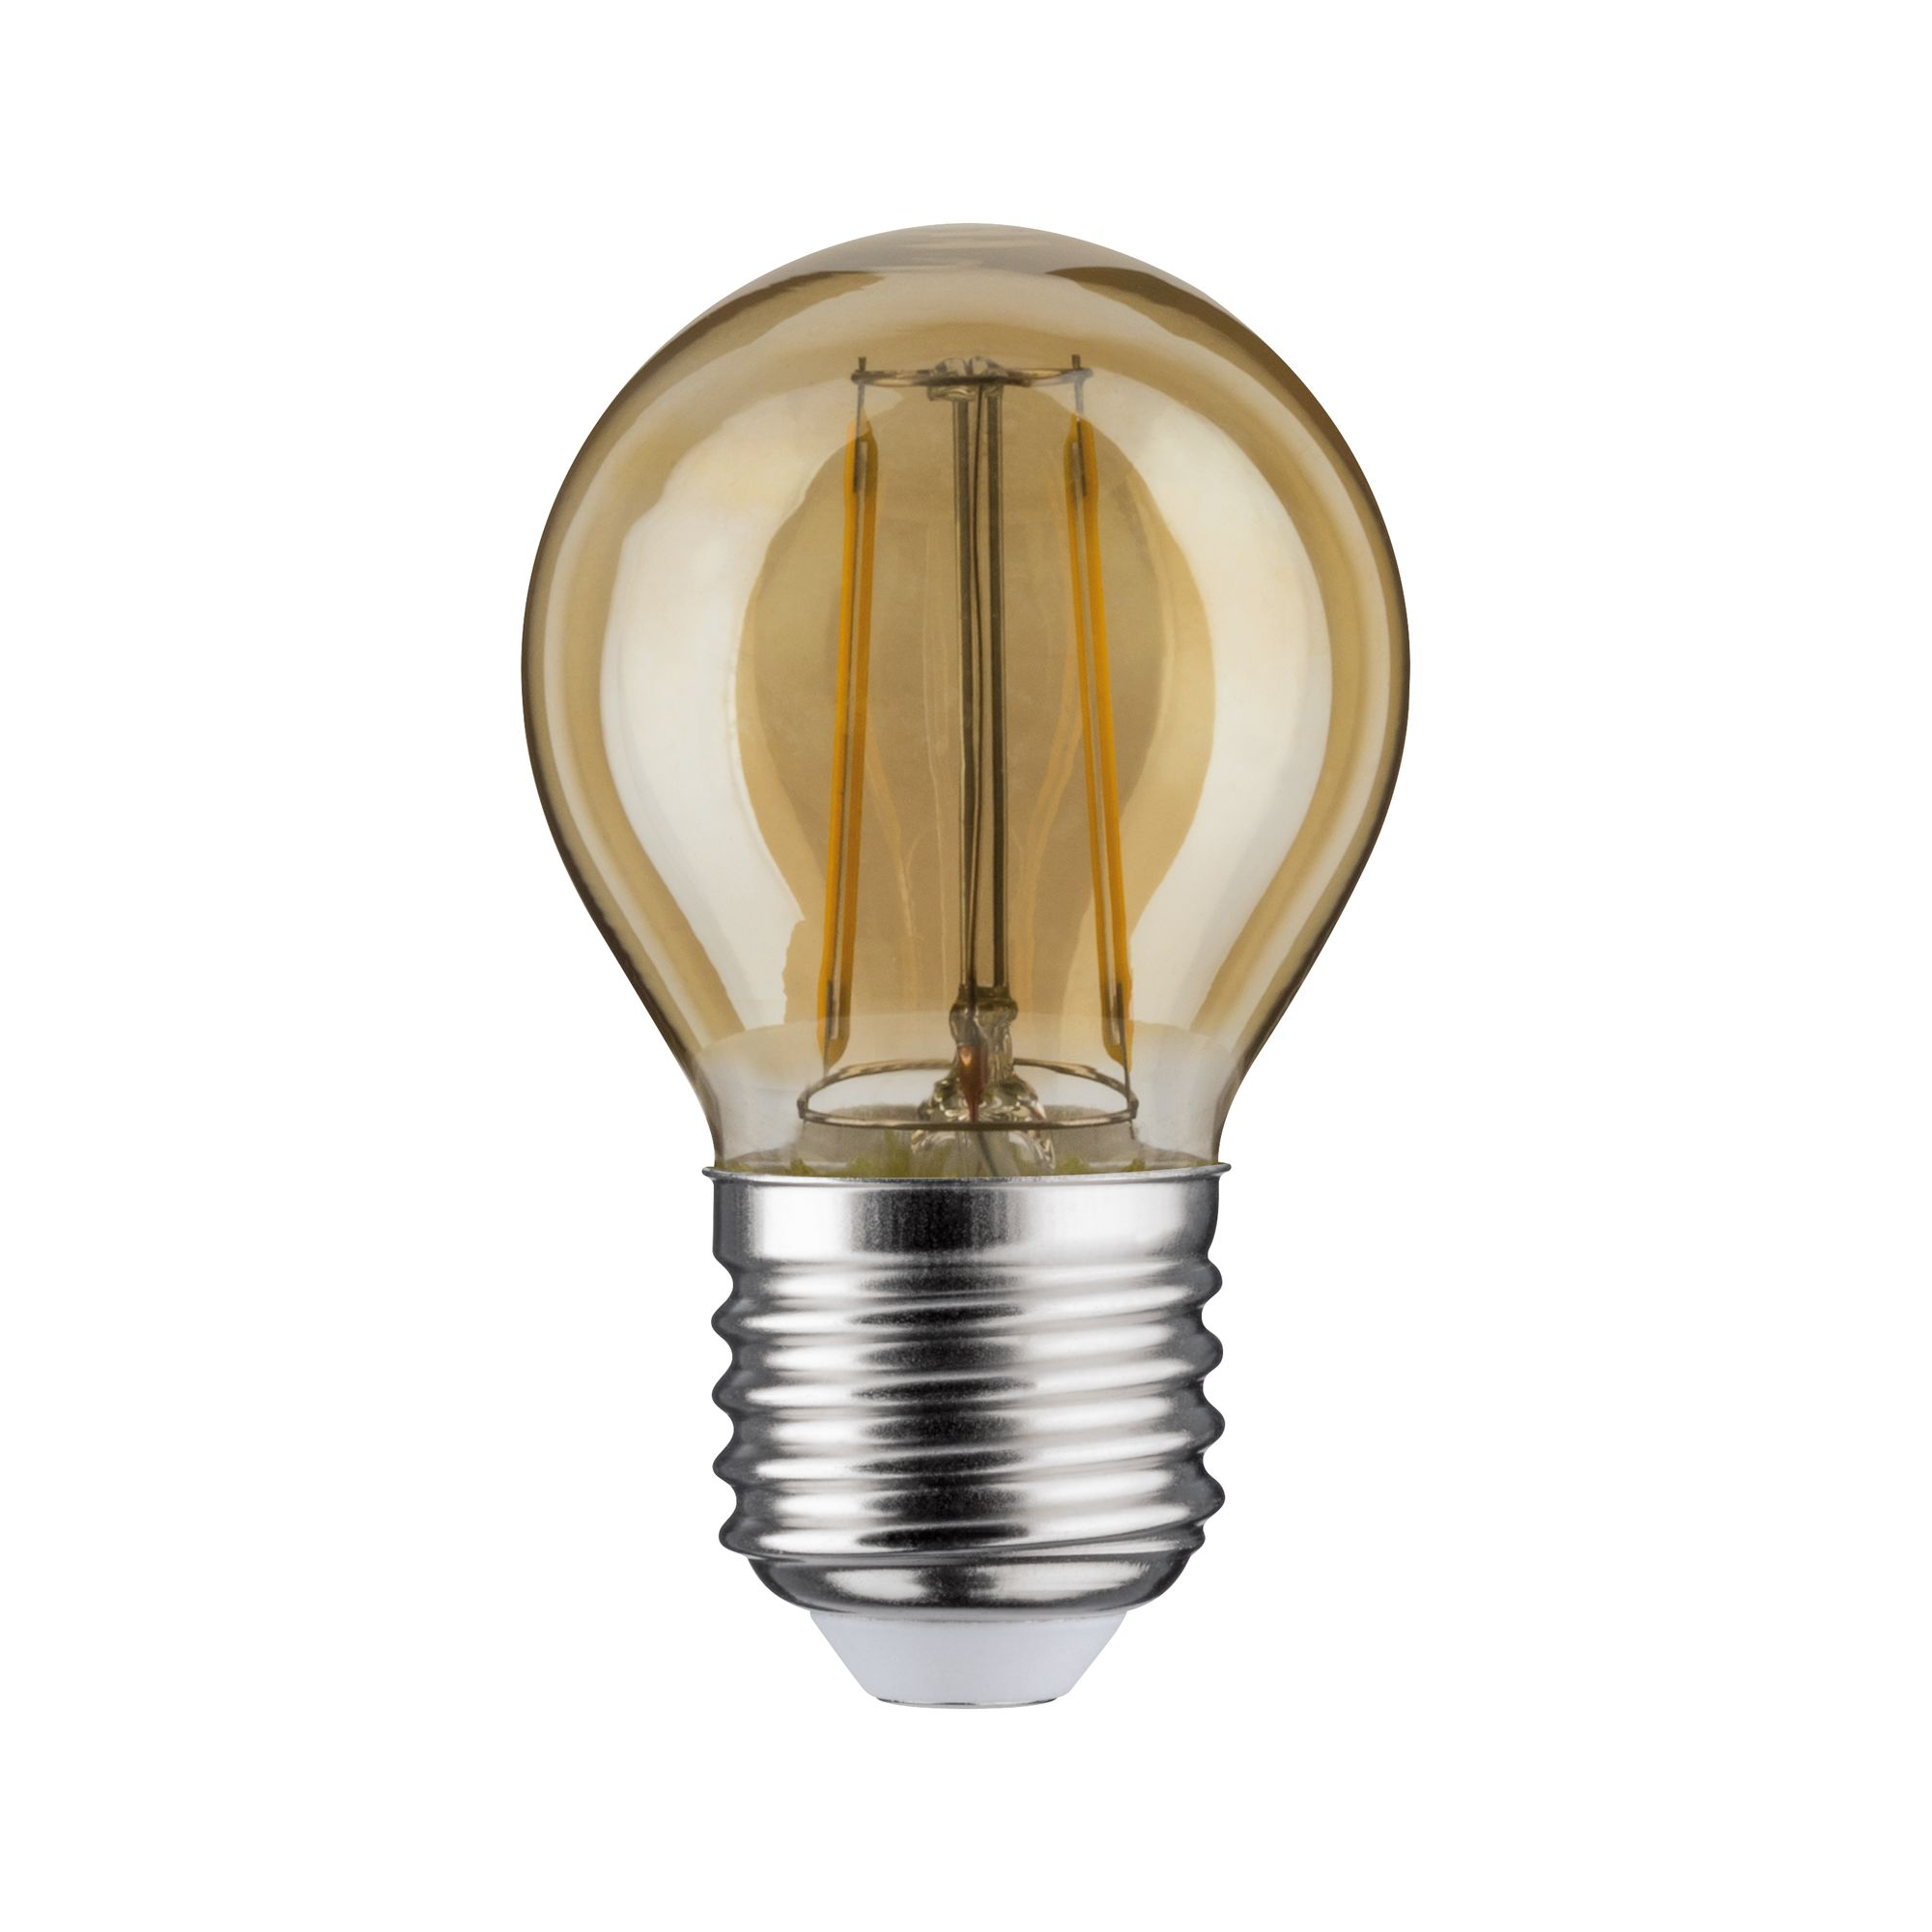 LED-Tropfenlampe E27 2,6W (26W) 260 lm warmgold + product picture